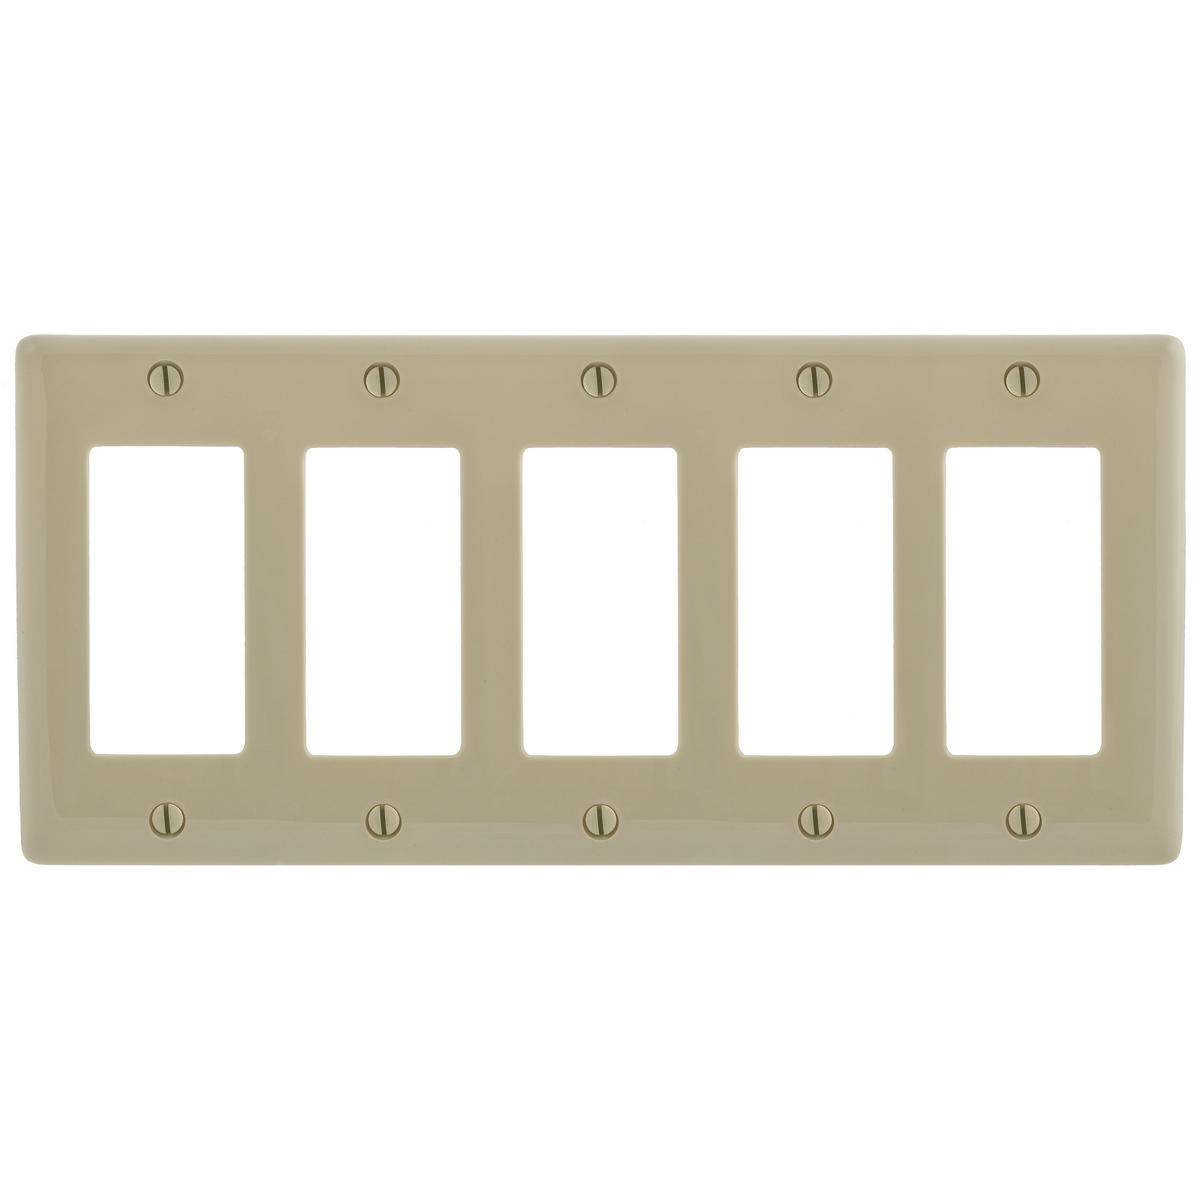 Hubbell NP265I Wallplates and Box Covers, Wallplate, Nylon, 5-Gang, 5) Decorator, Ivory  ; Reinforcement ribs for extra strength ; High-impact, self-extinguishing nylon material ; Captive screw feature holds mounting screw in place ; Standard Size is 1/8" larger to give